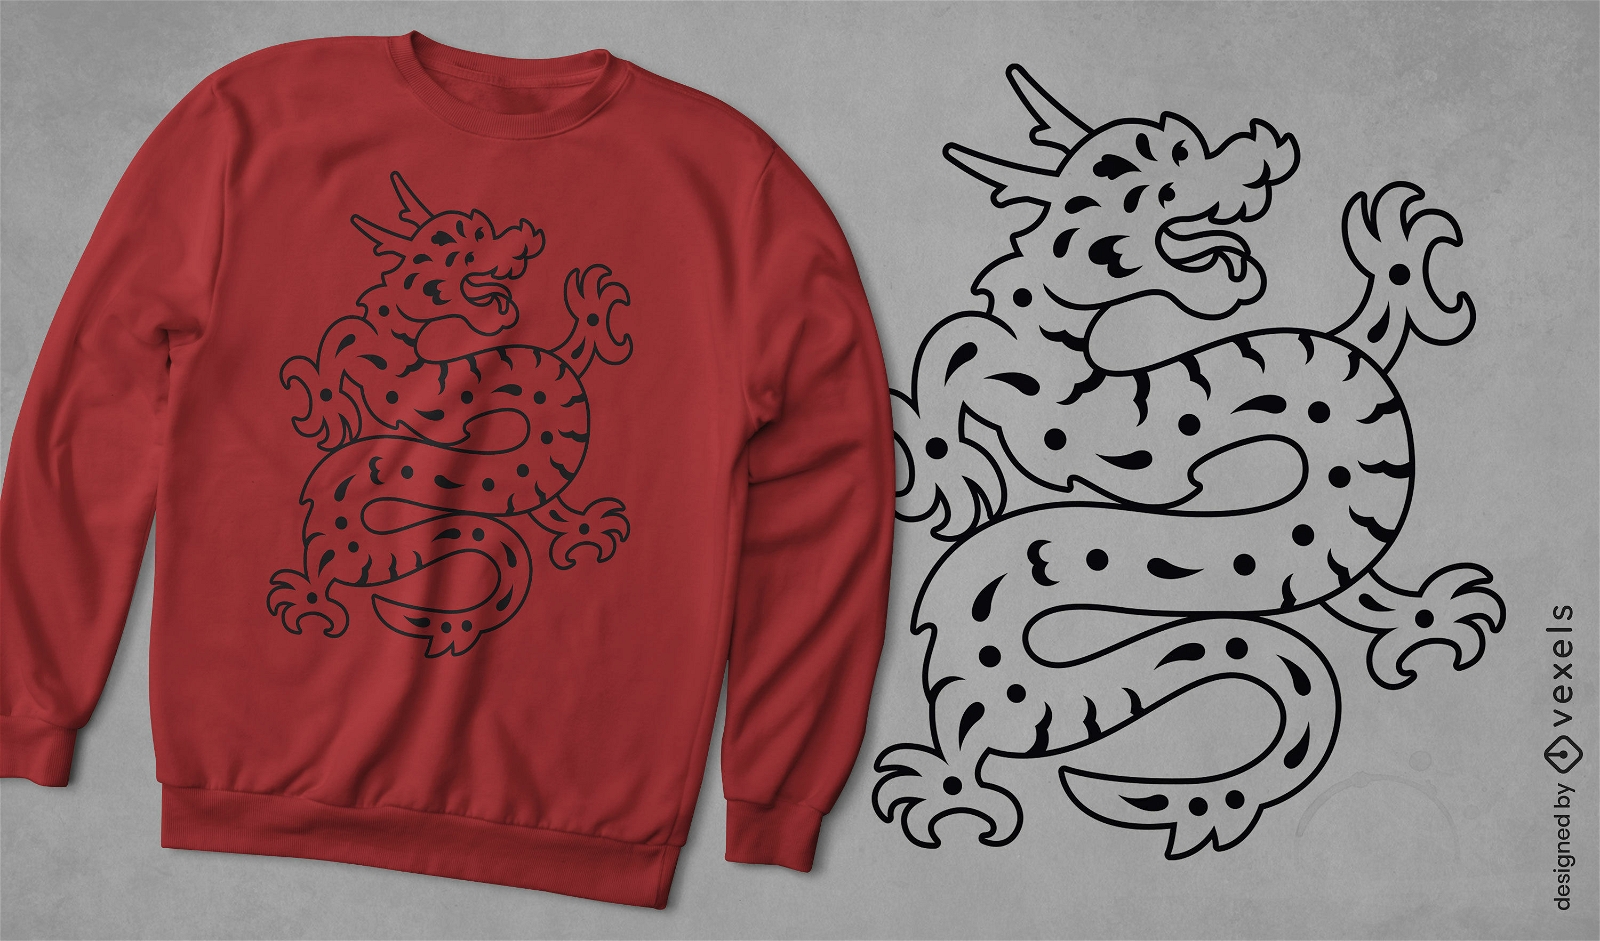 Chinese traditional dragon t-shirt design